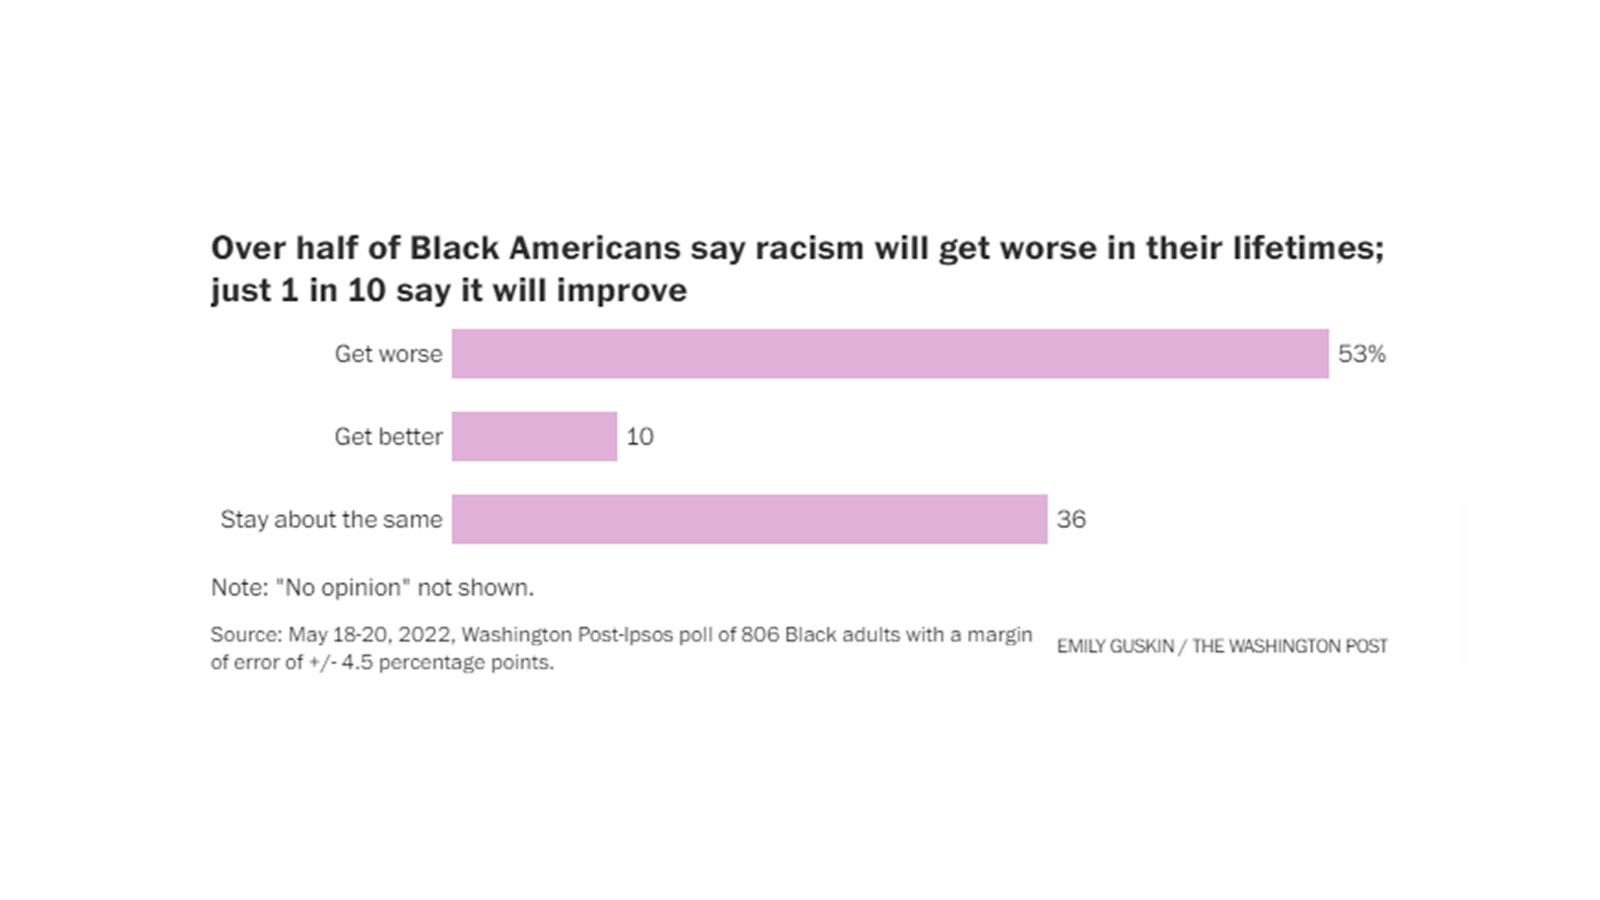 Over half of Black Americans say racism will get worse in their lifetimes; just 1 in 10 say it will improve